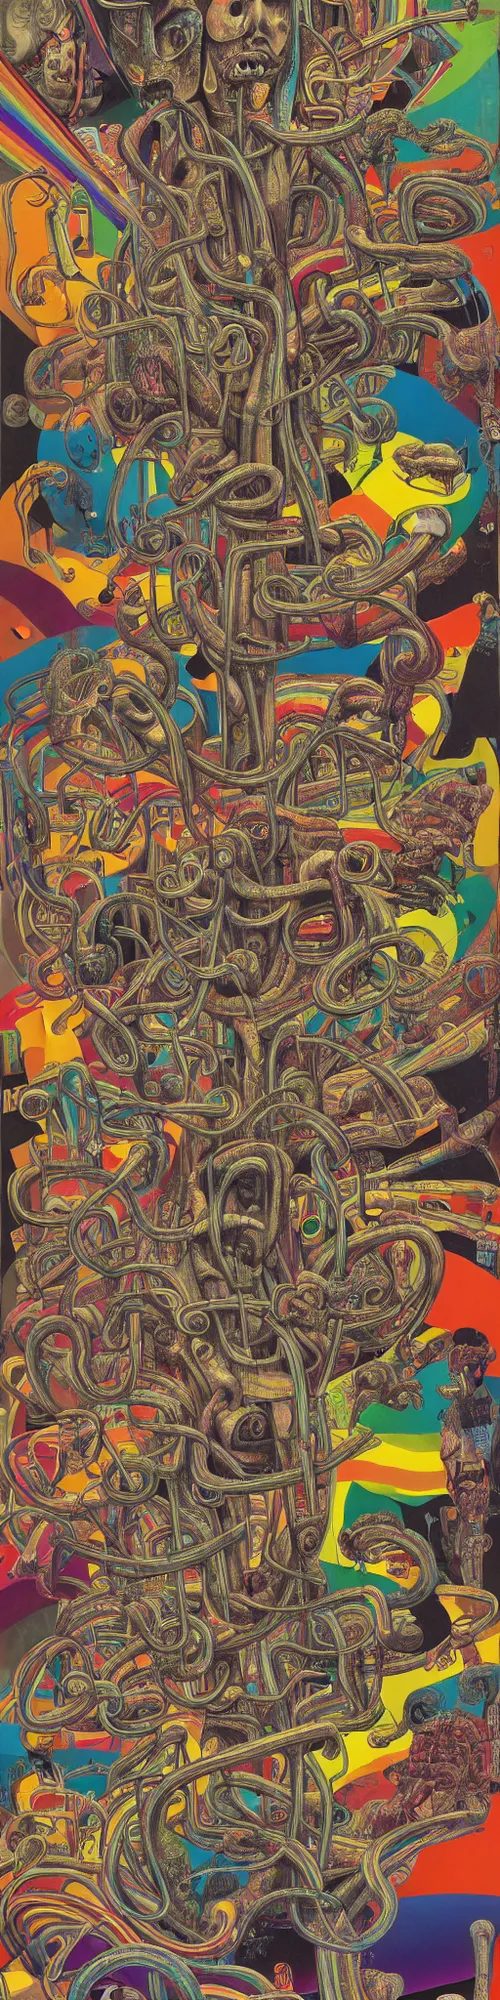 Prompt: american excess, large crowd, cubensis, graffiti, tag, wildstyle, bubble letter, melting, conventional collage, cubism, muted but vibrant colors, muted rainbow tubing, dali, r crumb, hr giger, basil wolverton